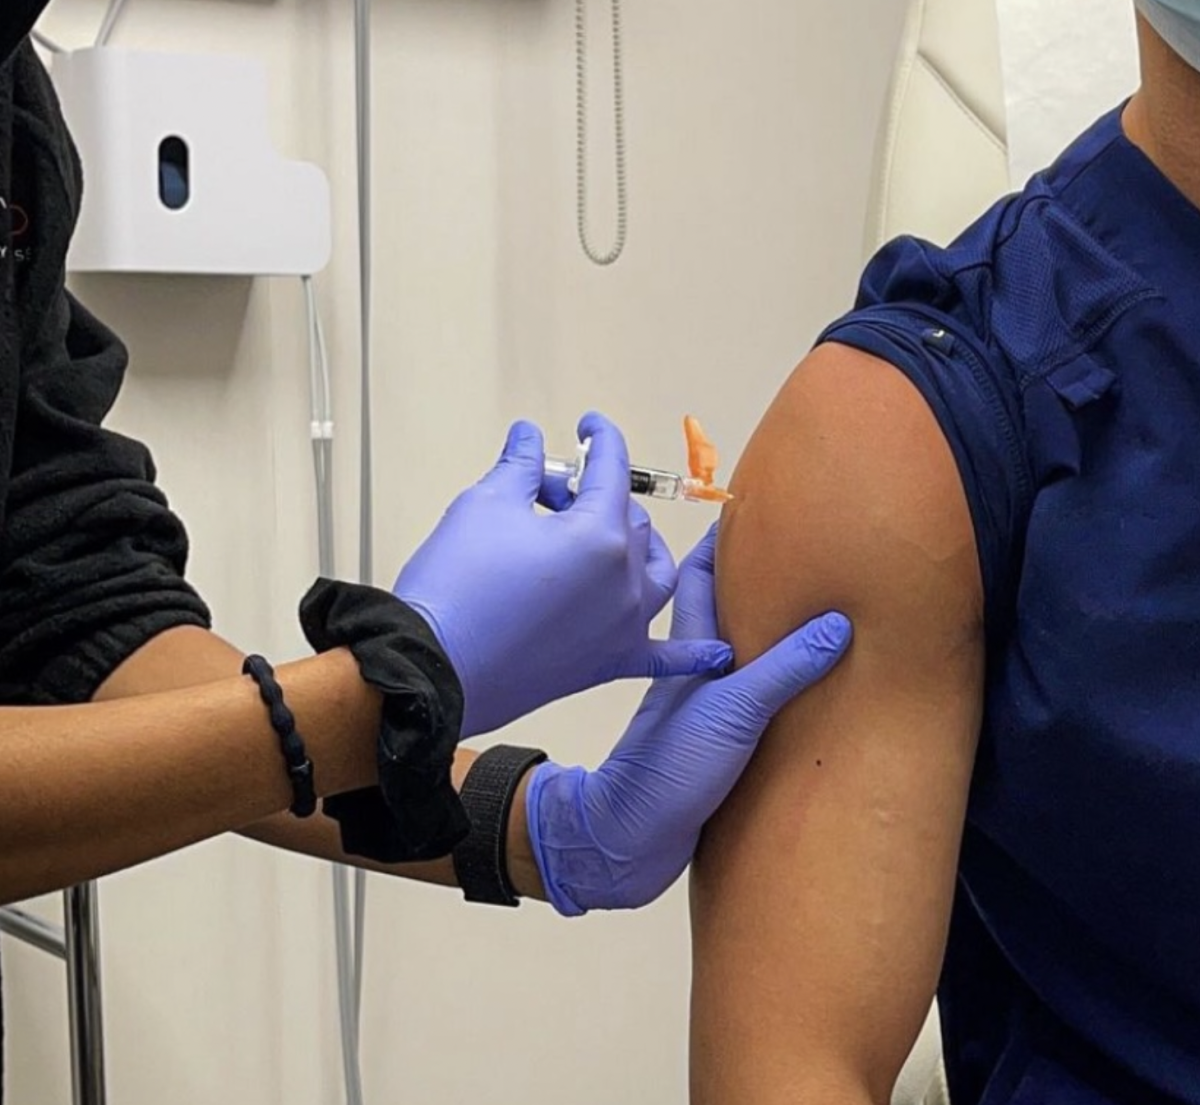 One precaution most people take is getting their flu shot, either at the University Health Center or a local pharmacy. The Health Center had flu shot events where students can walk in and get their shots. (Courtesy of Instagram)